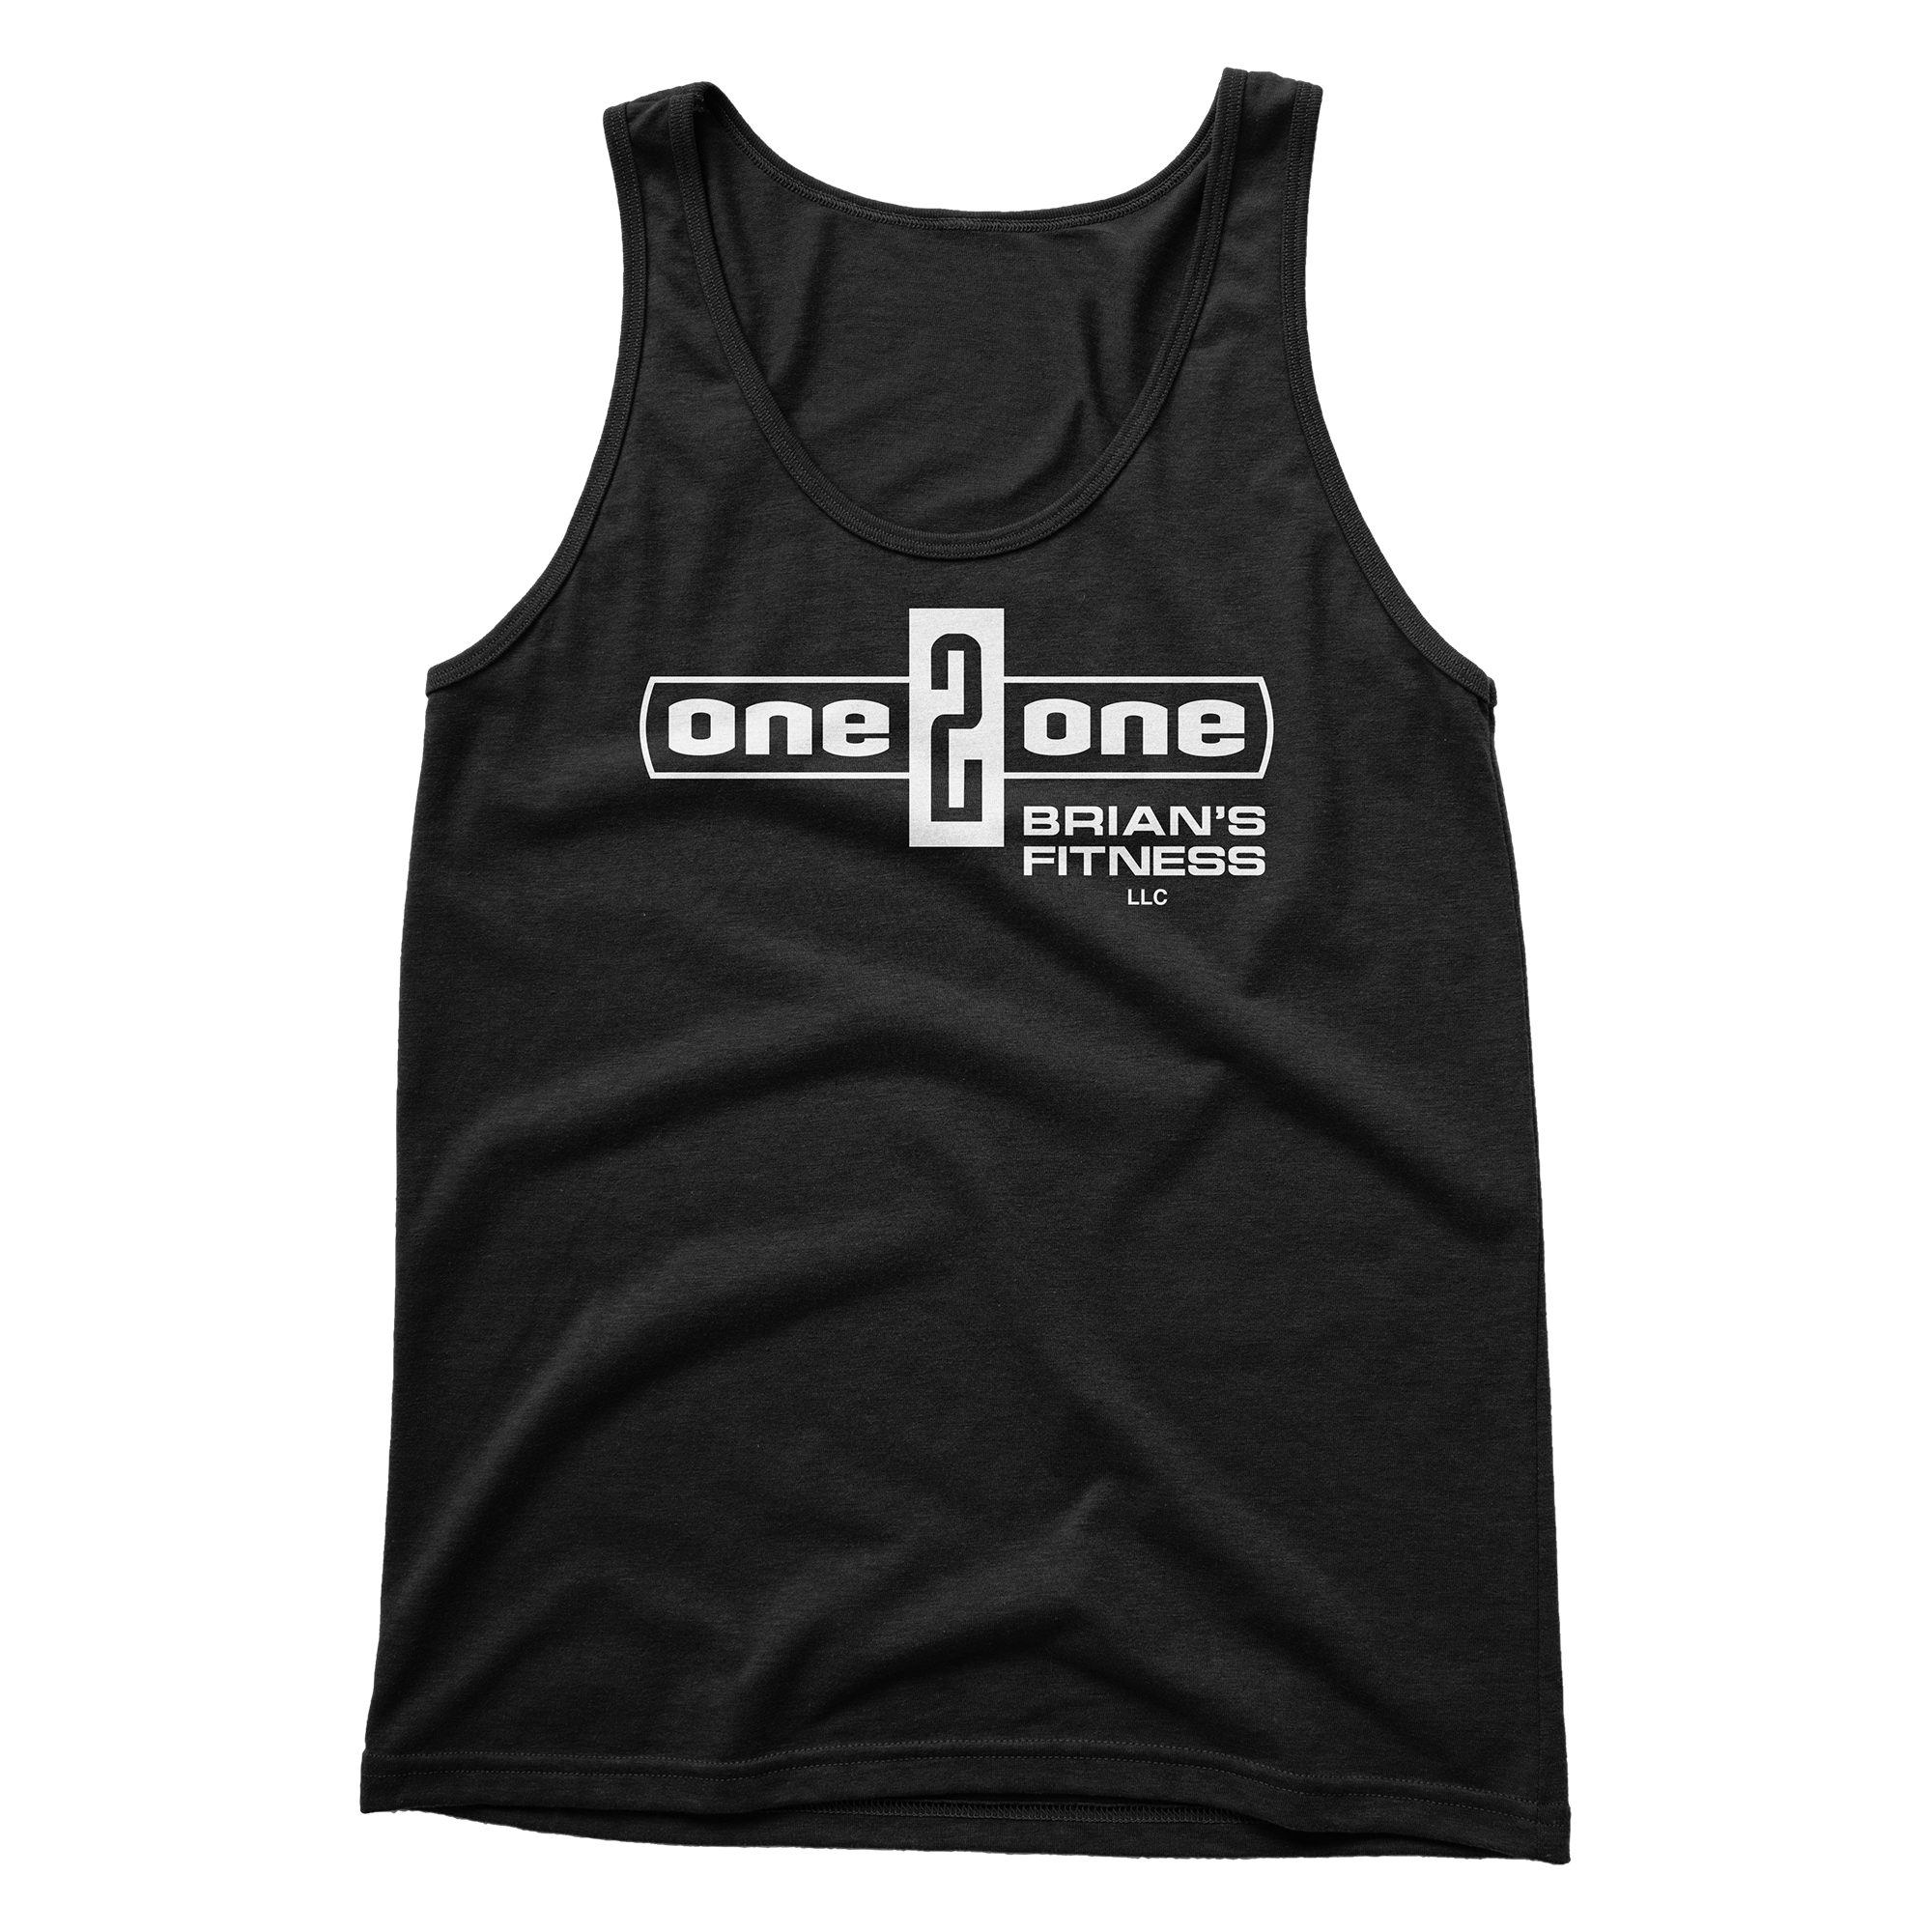 One 2 One Fitness - Uncommon Breed Unisex Tank Top